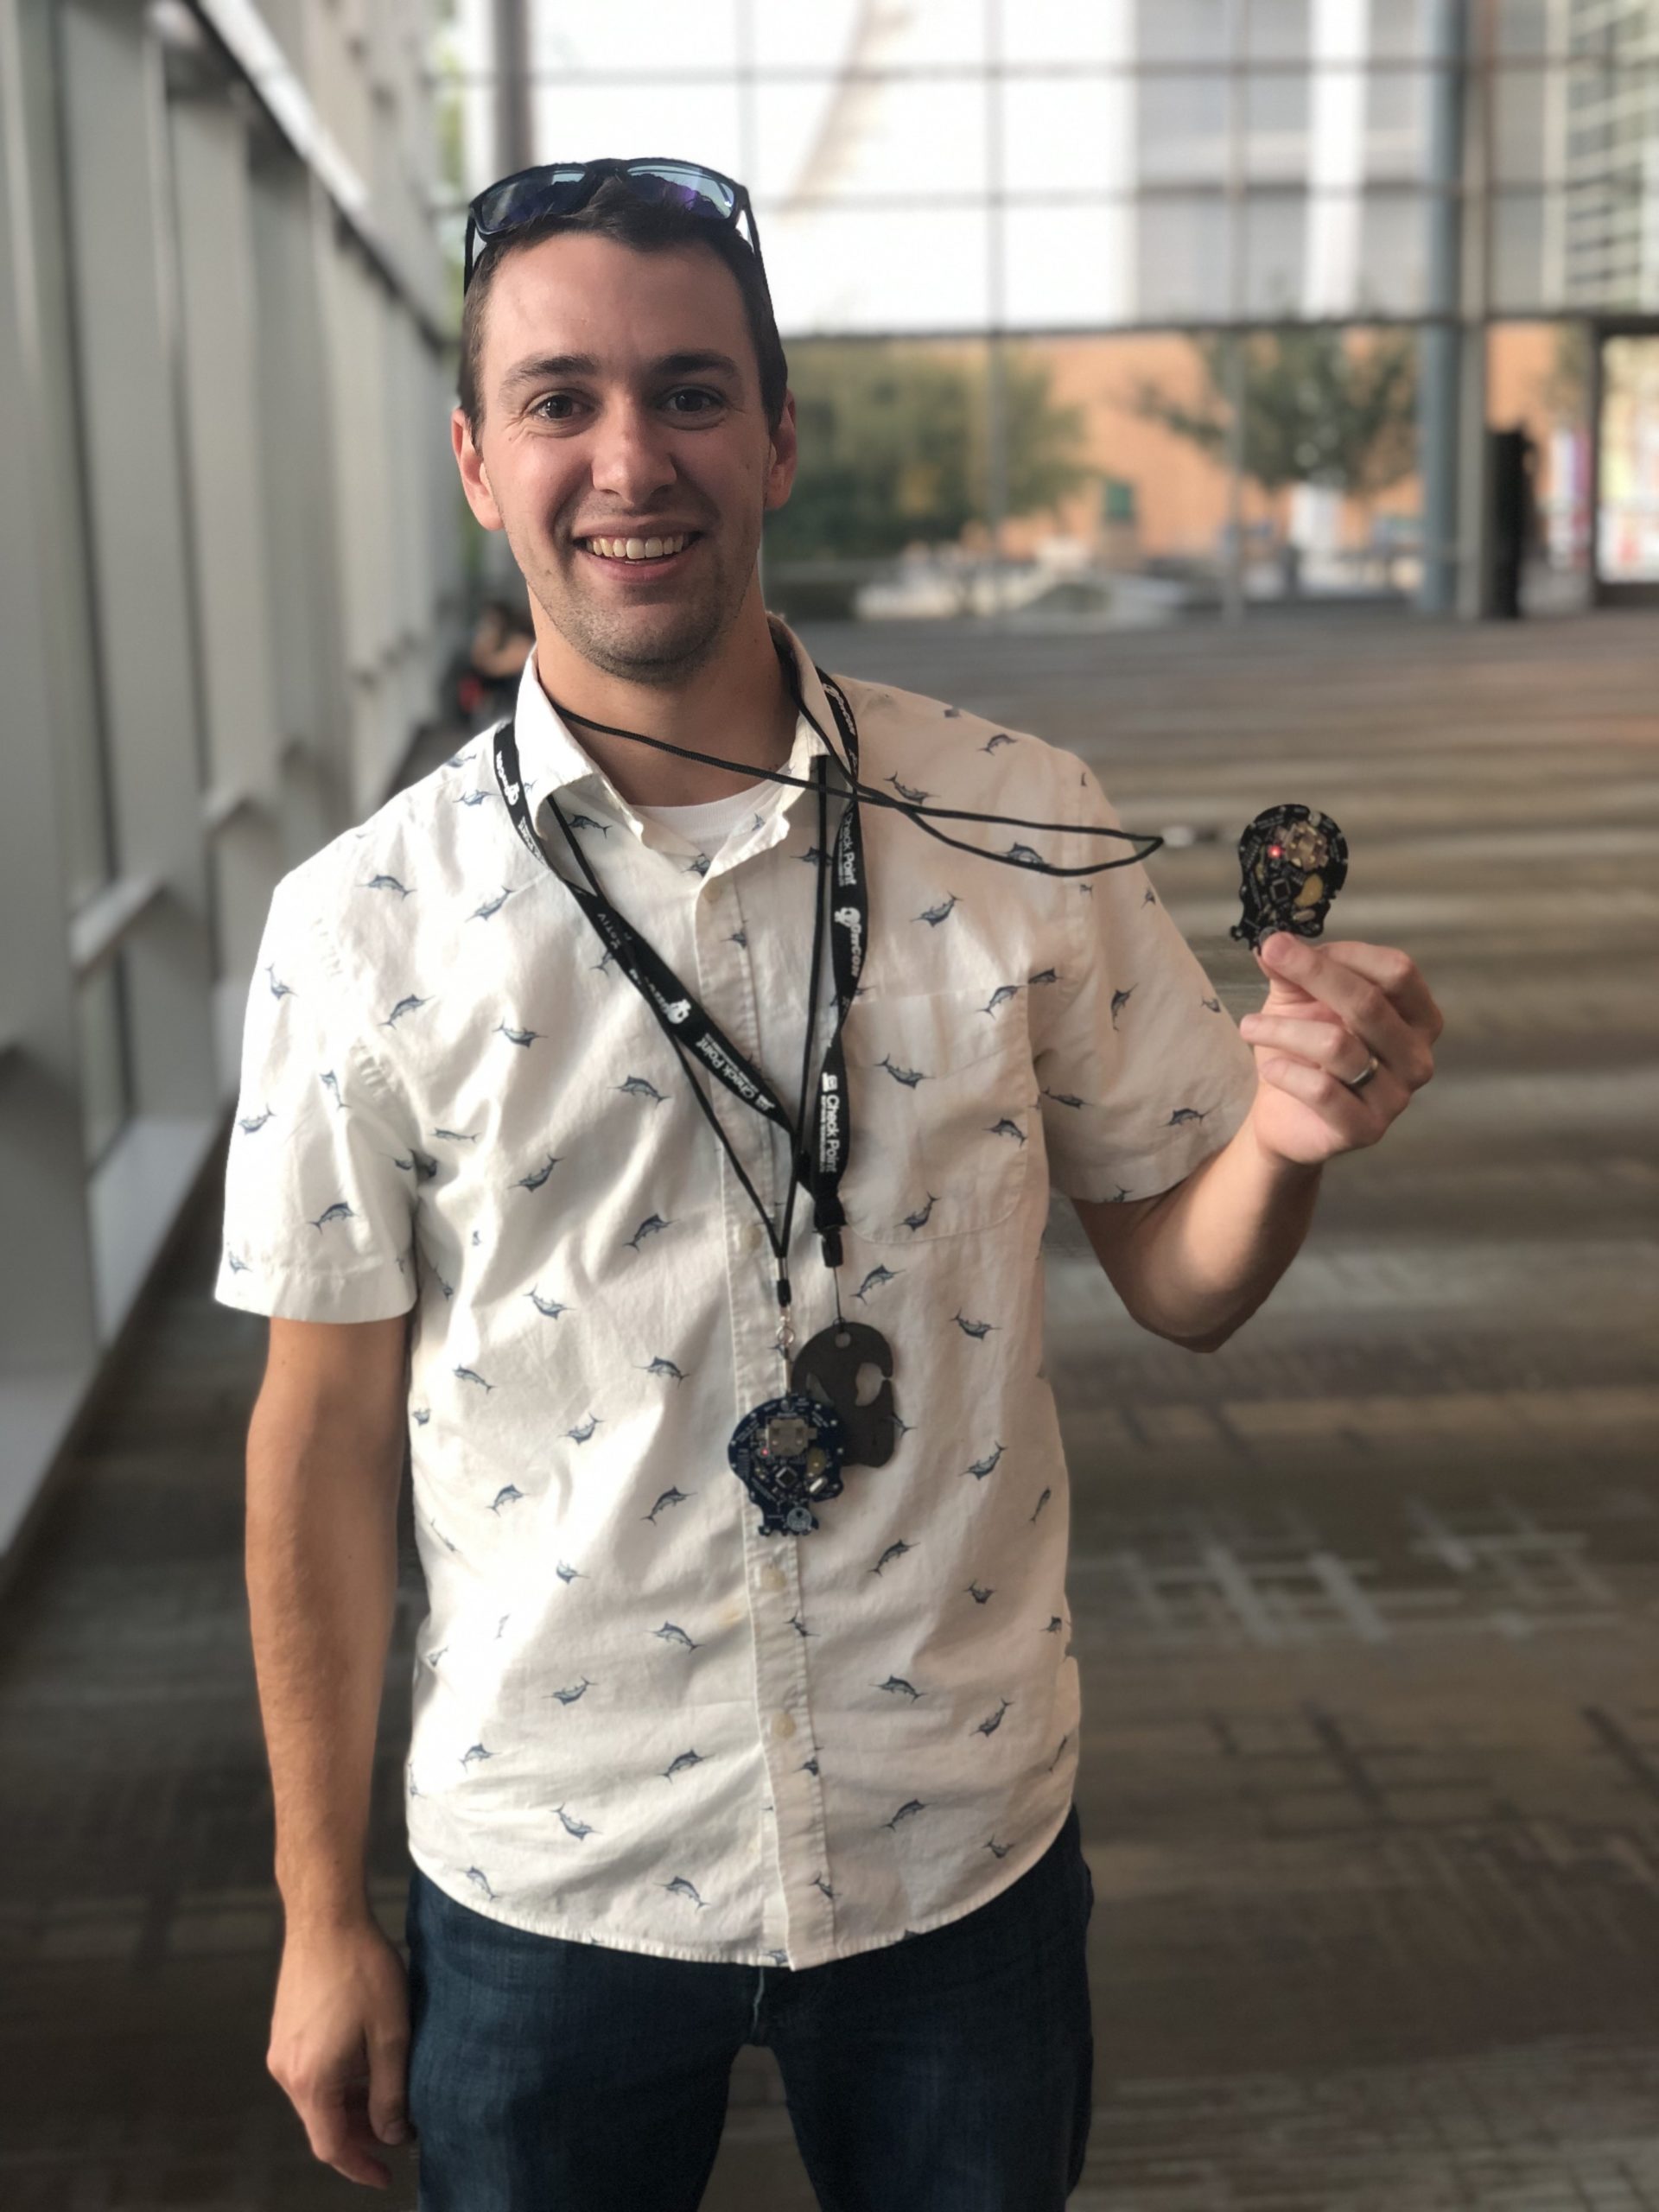 Connor Ivens holding his Black Badge after winning GrrCON which gives him a free conference pass for life.